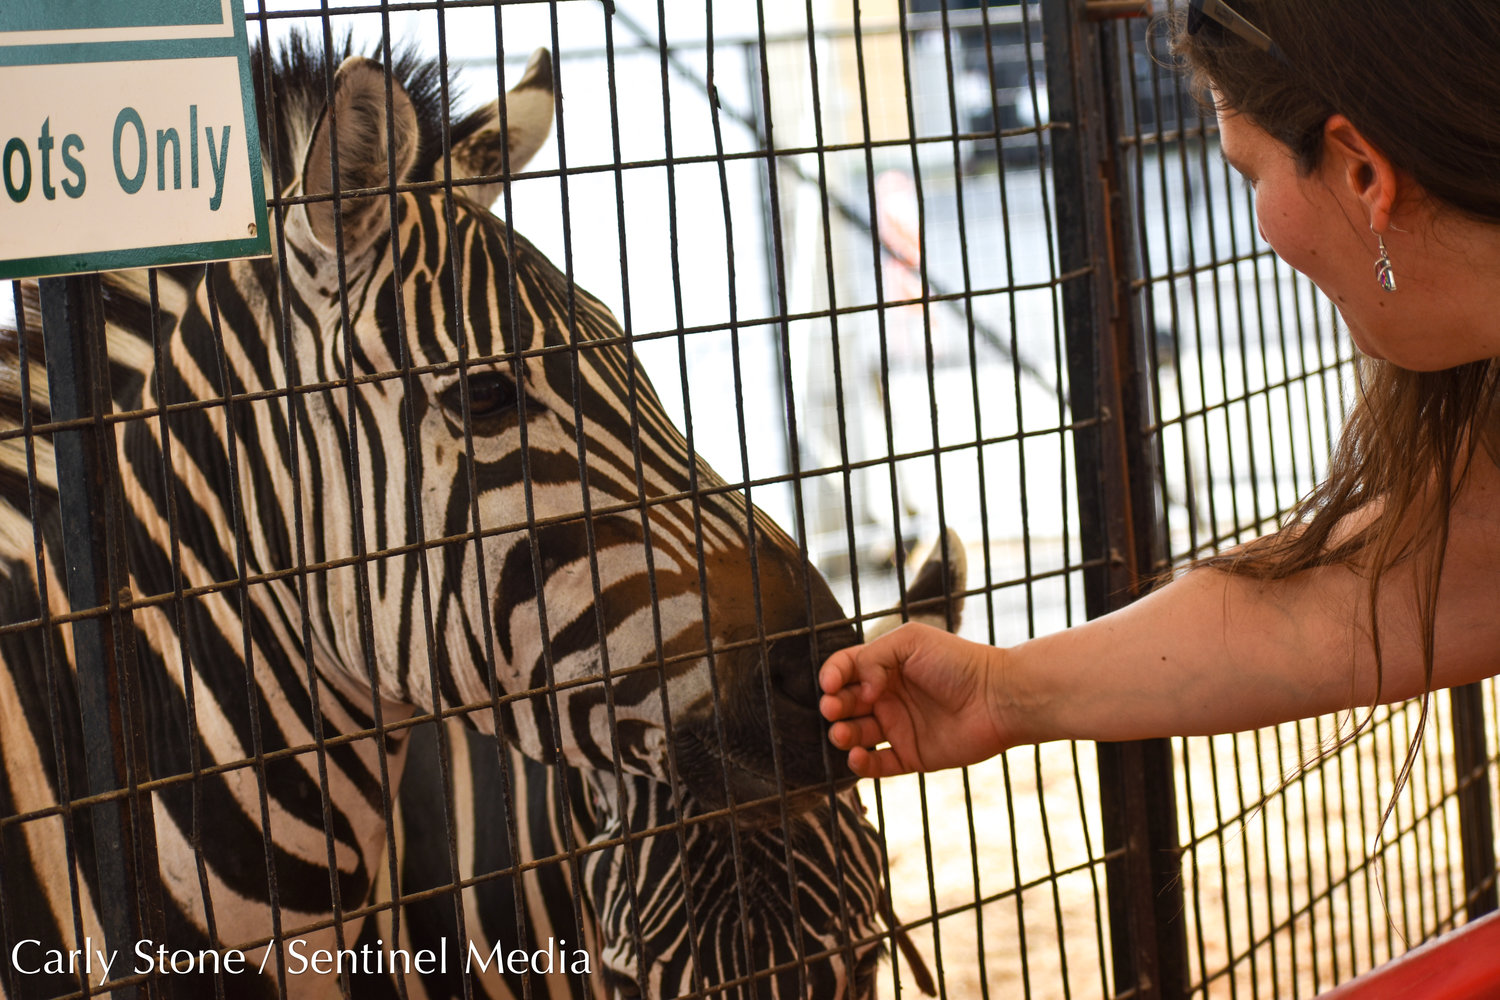 Fairgoers can feed carrots to zebras at the petting zoo tent near the Family Fun Zone at the NYS Fair.